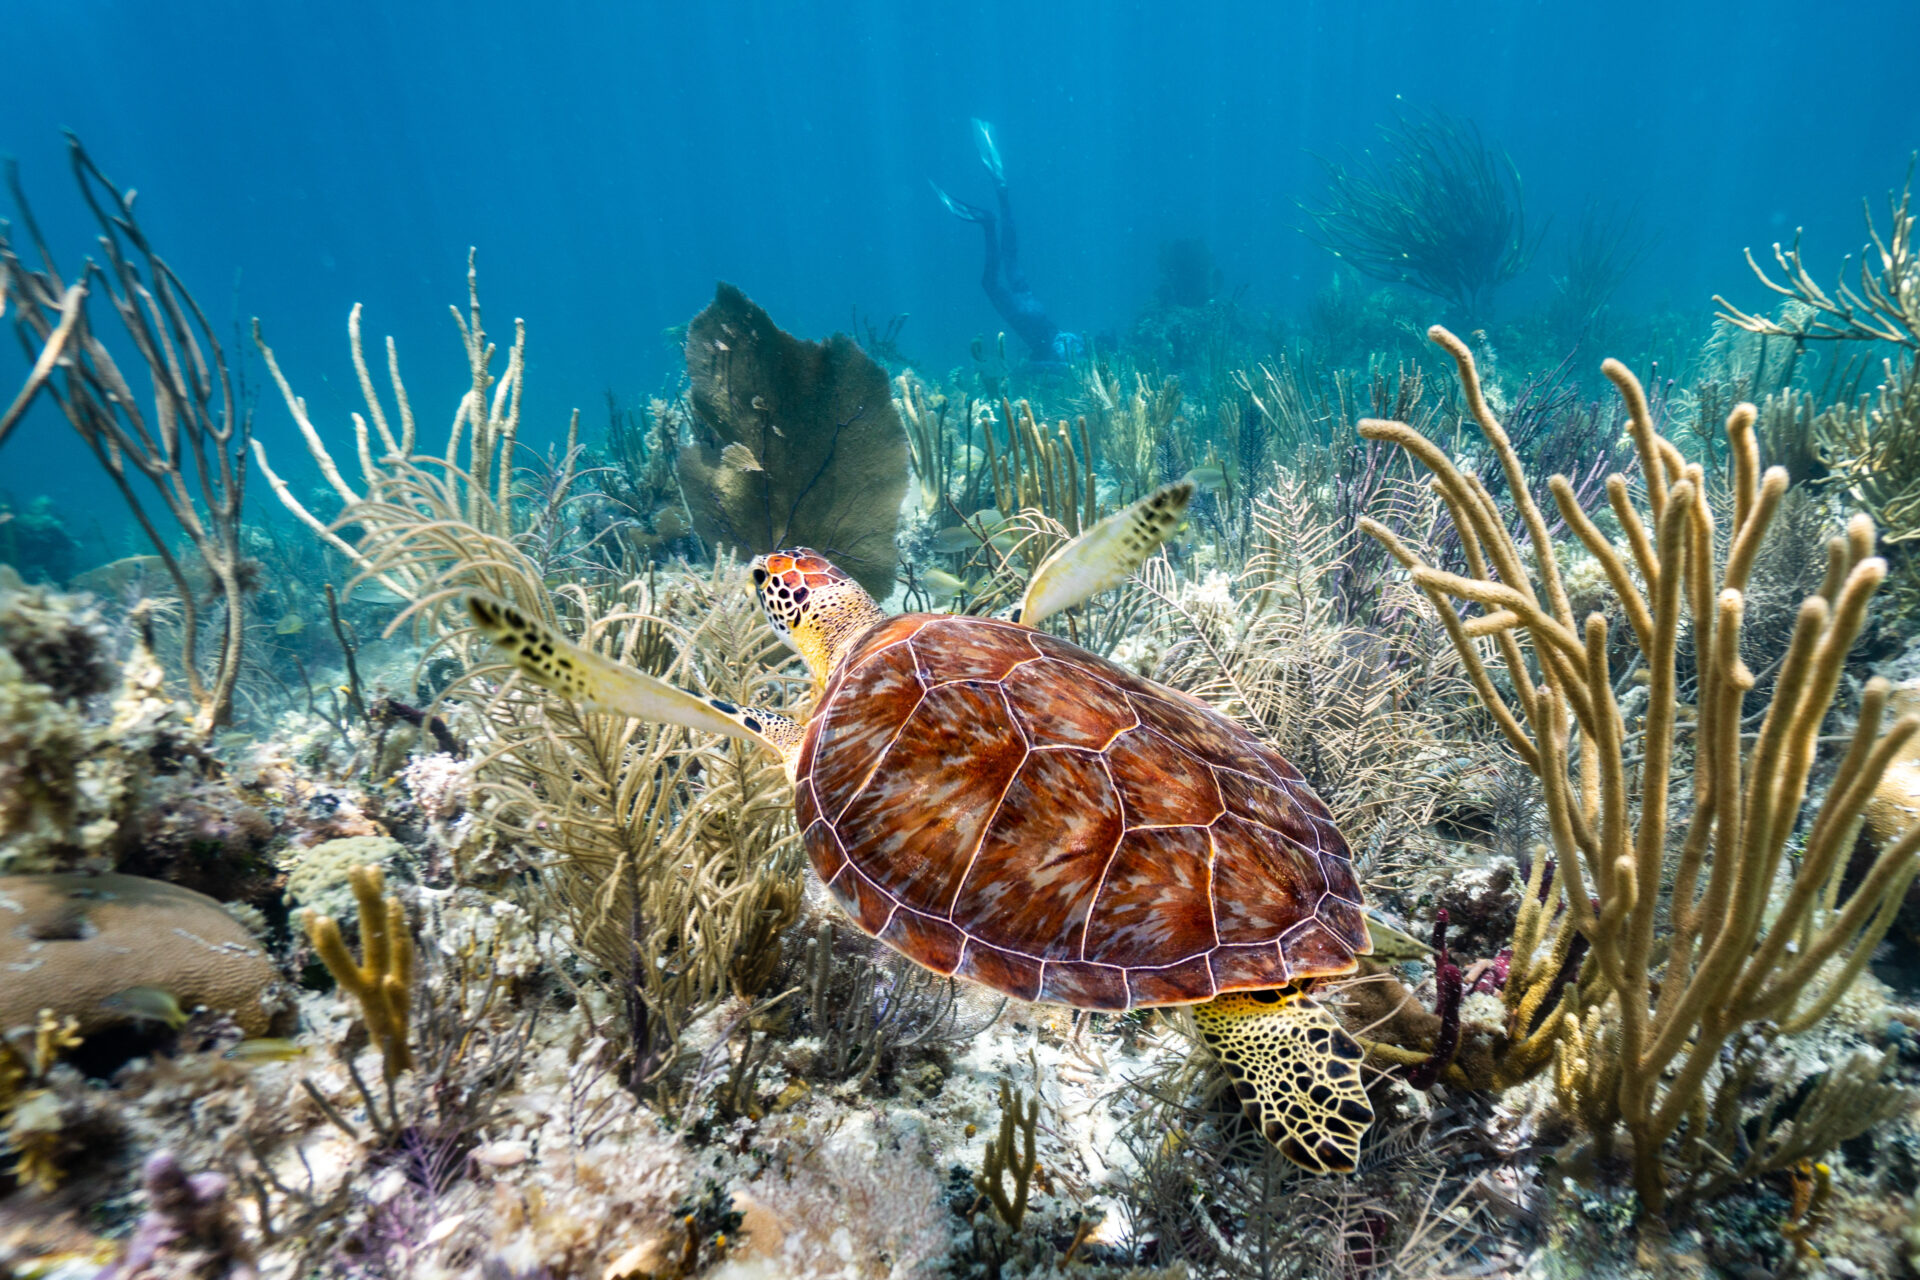 Image of turtle underwater after editing. Van Hook media specializes in underwater photography, bringing out the colors of the underwater world.